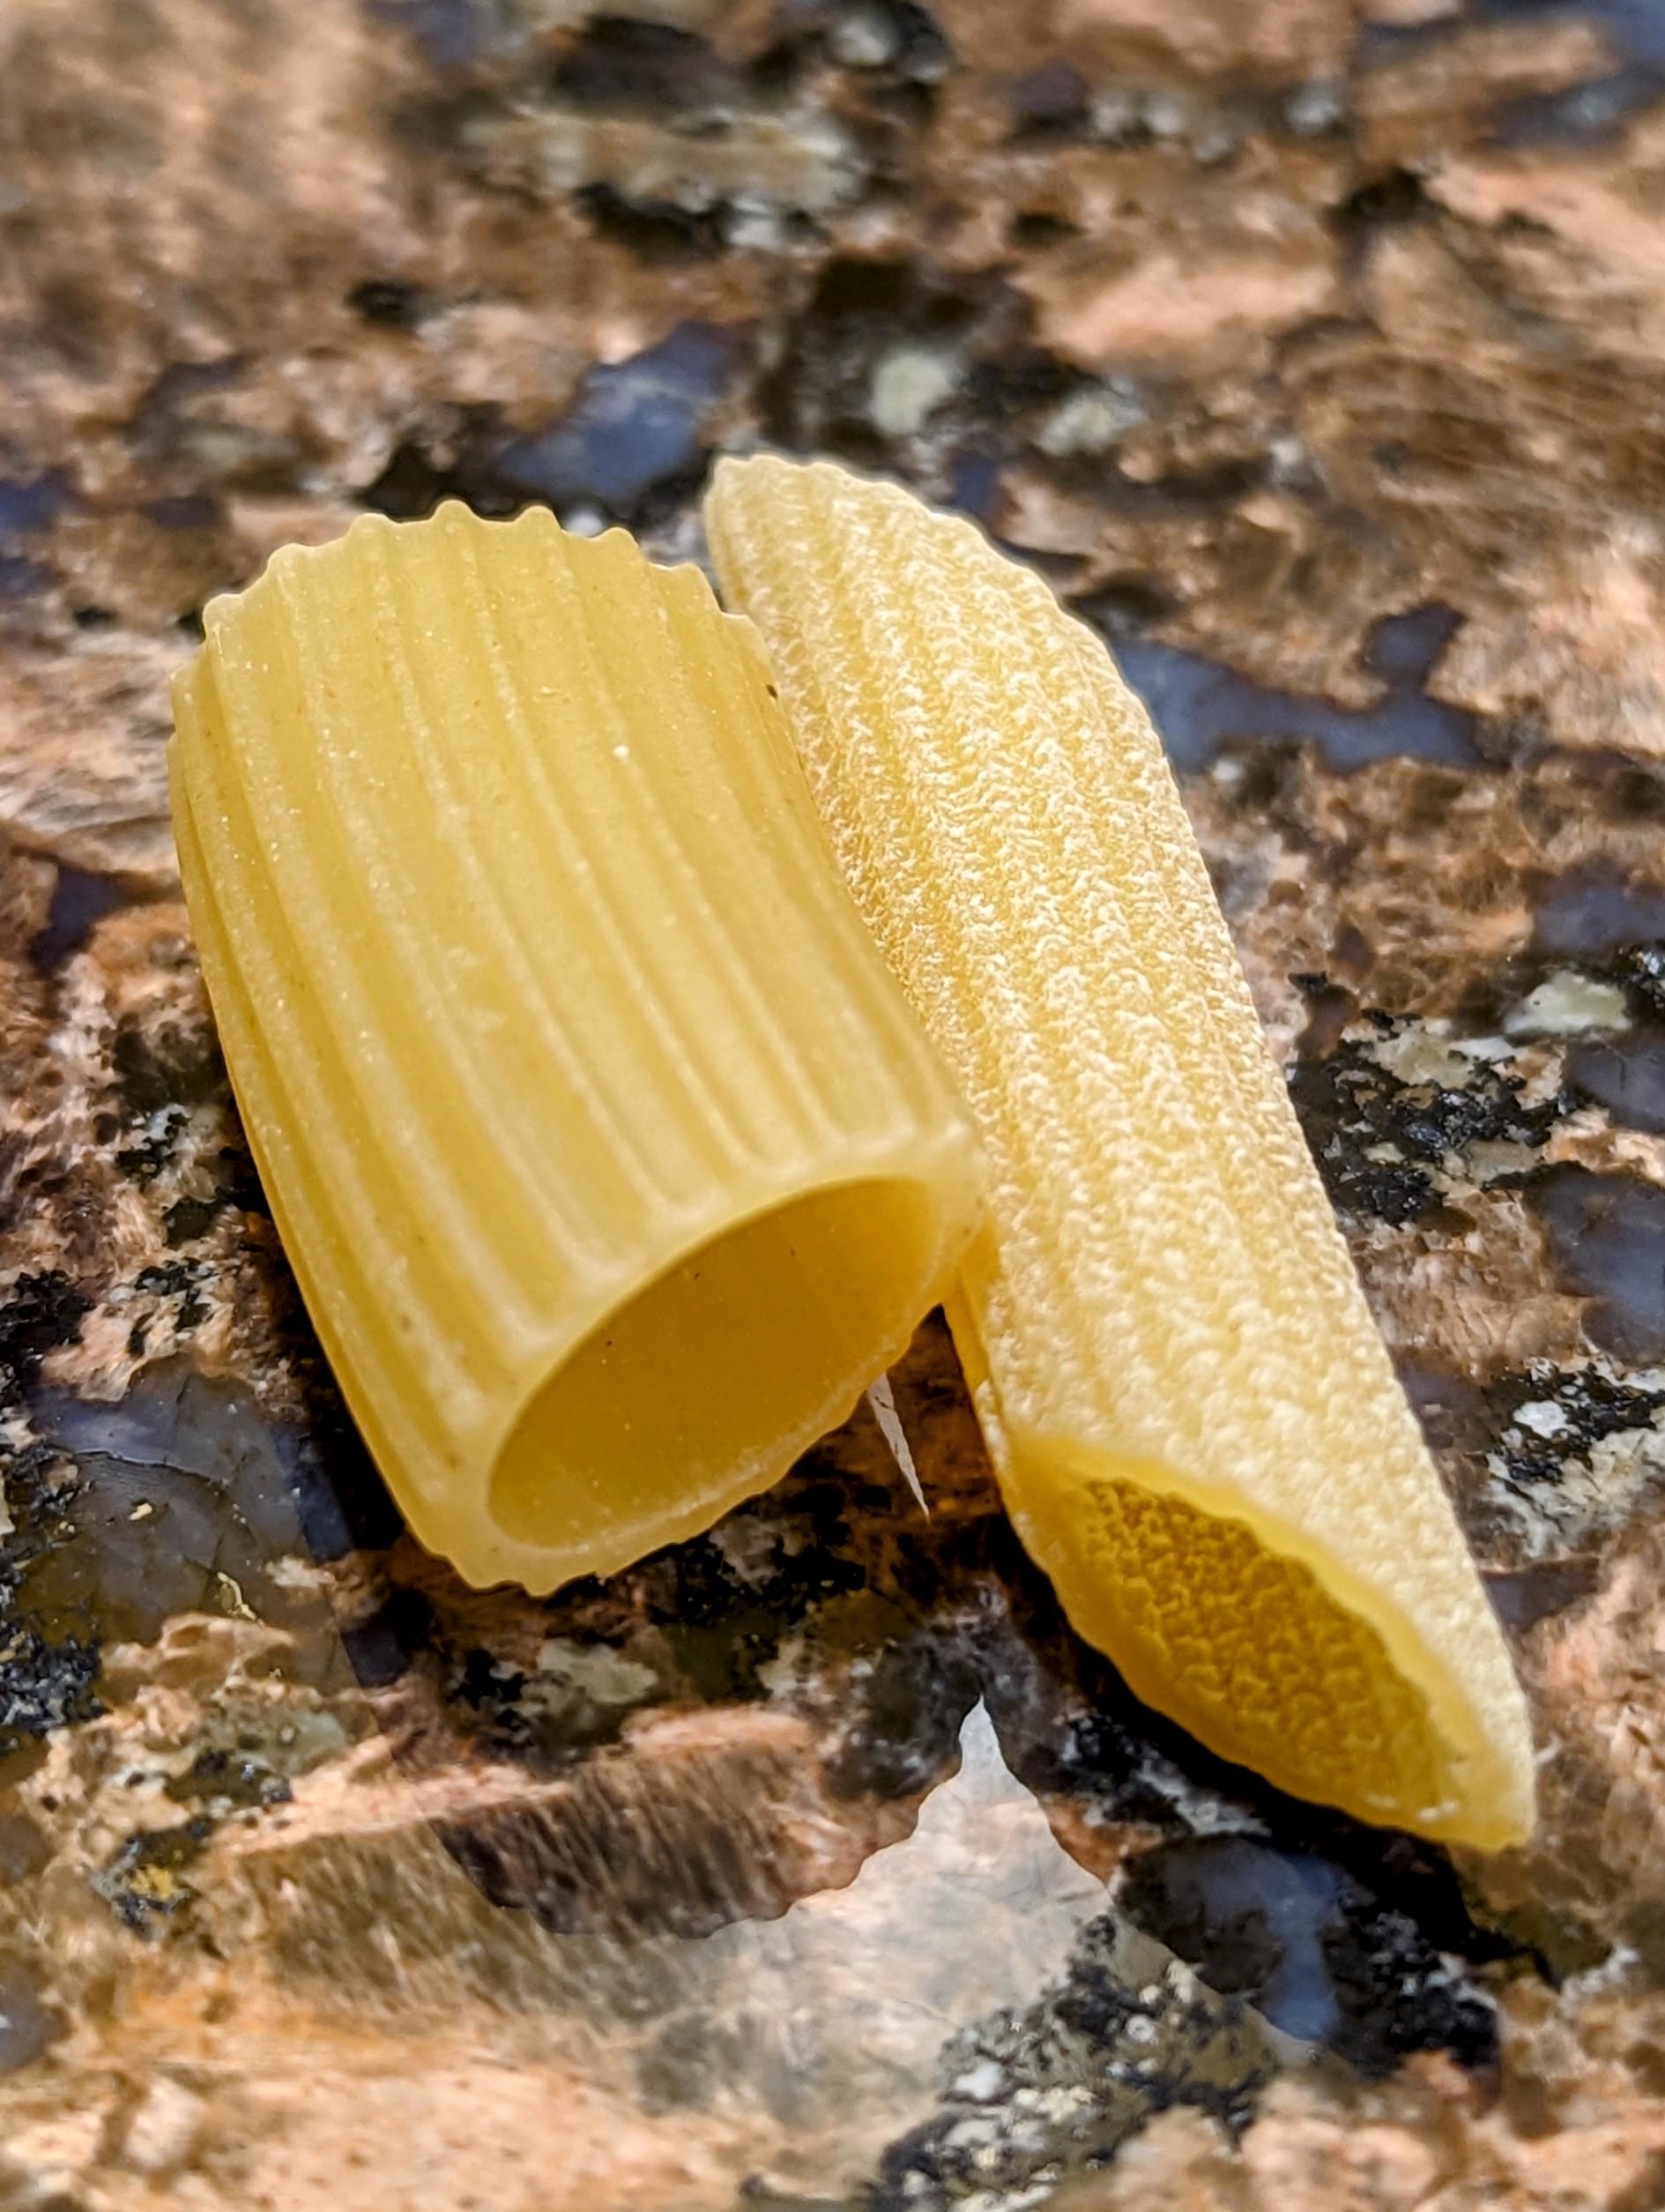 Two pieces of uncooked pasta on a textured surface, with the pasta on the right having a finer, more granulated texture